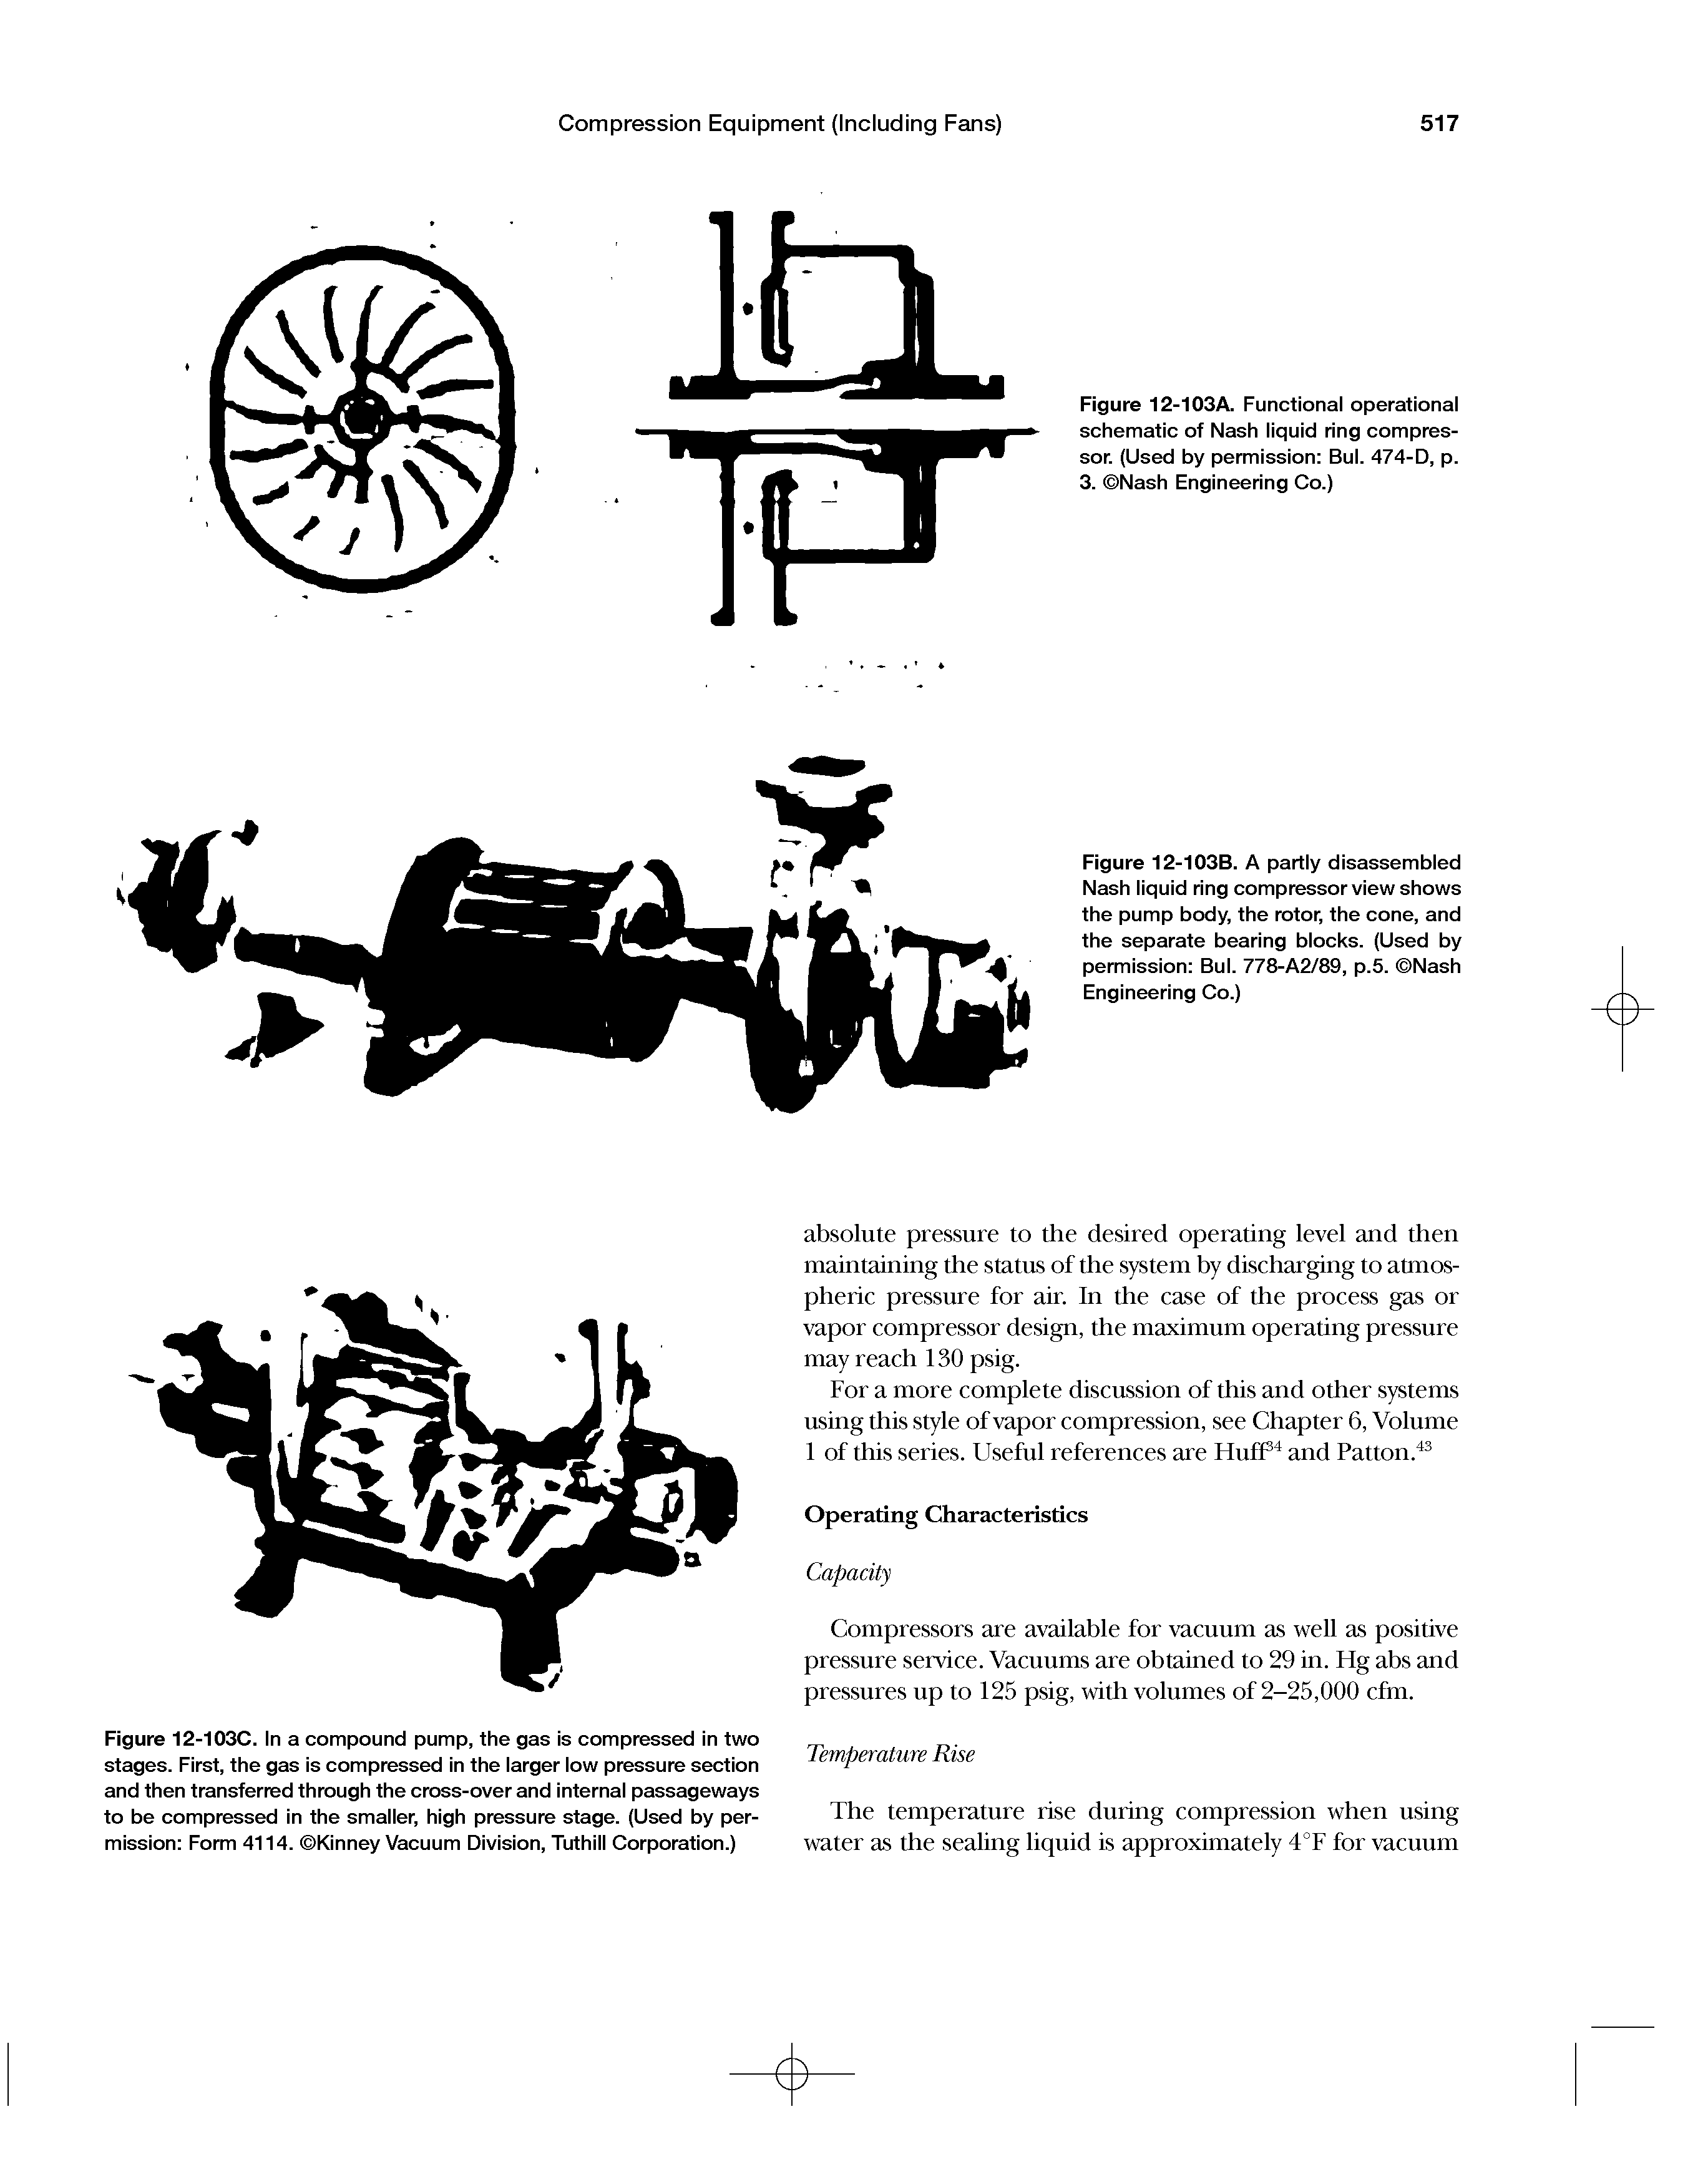 Figure 12-103B. A partly disassembled Nash liquid ring compressor view shows the pump body, the rotor, the cone, and the separate bearing blocks. (Used by permission Bui. 778-A2/89, p.5. Nash Engineering Co.)...